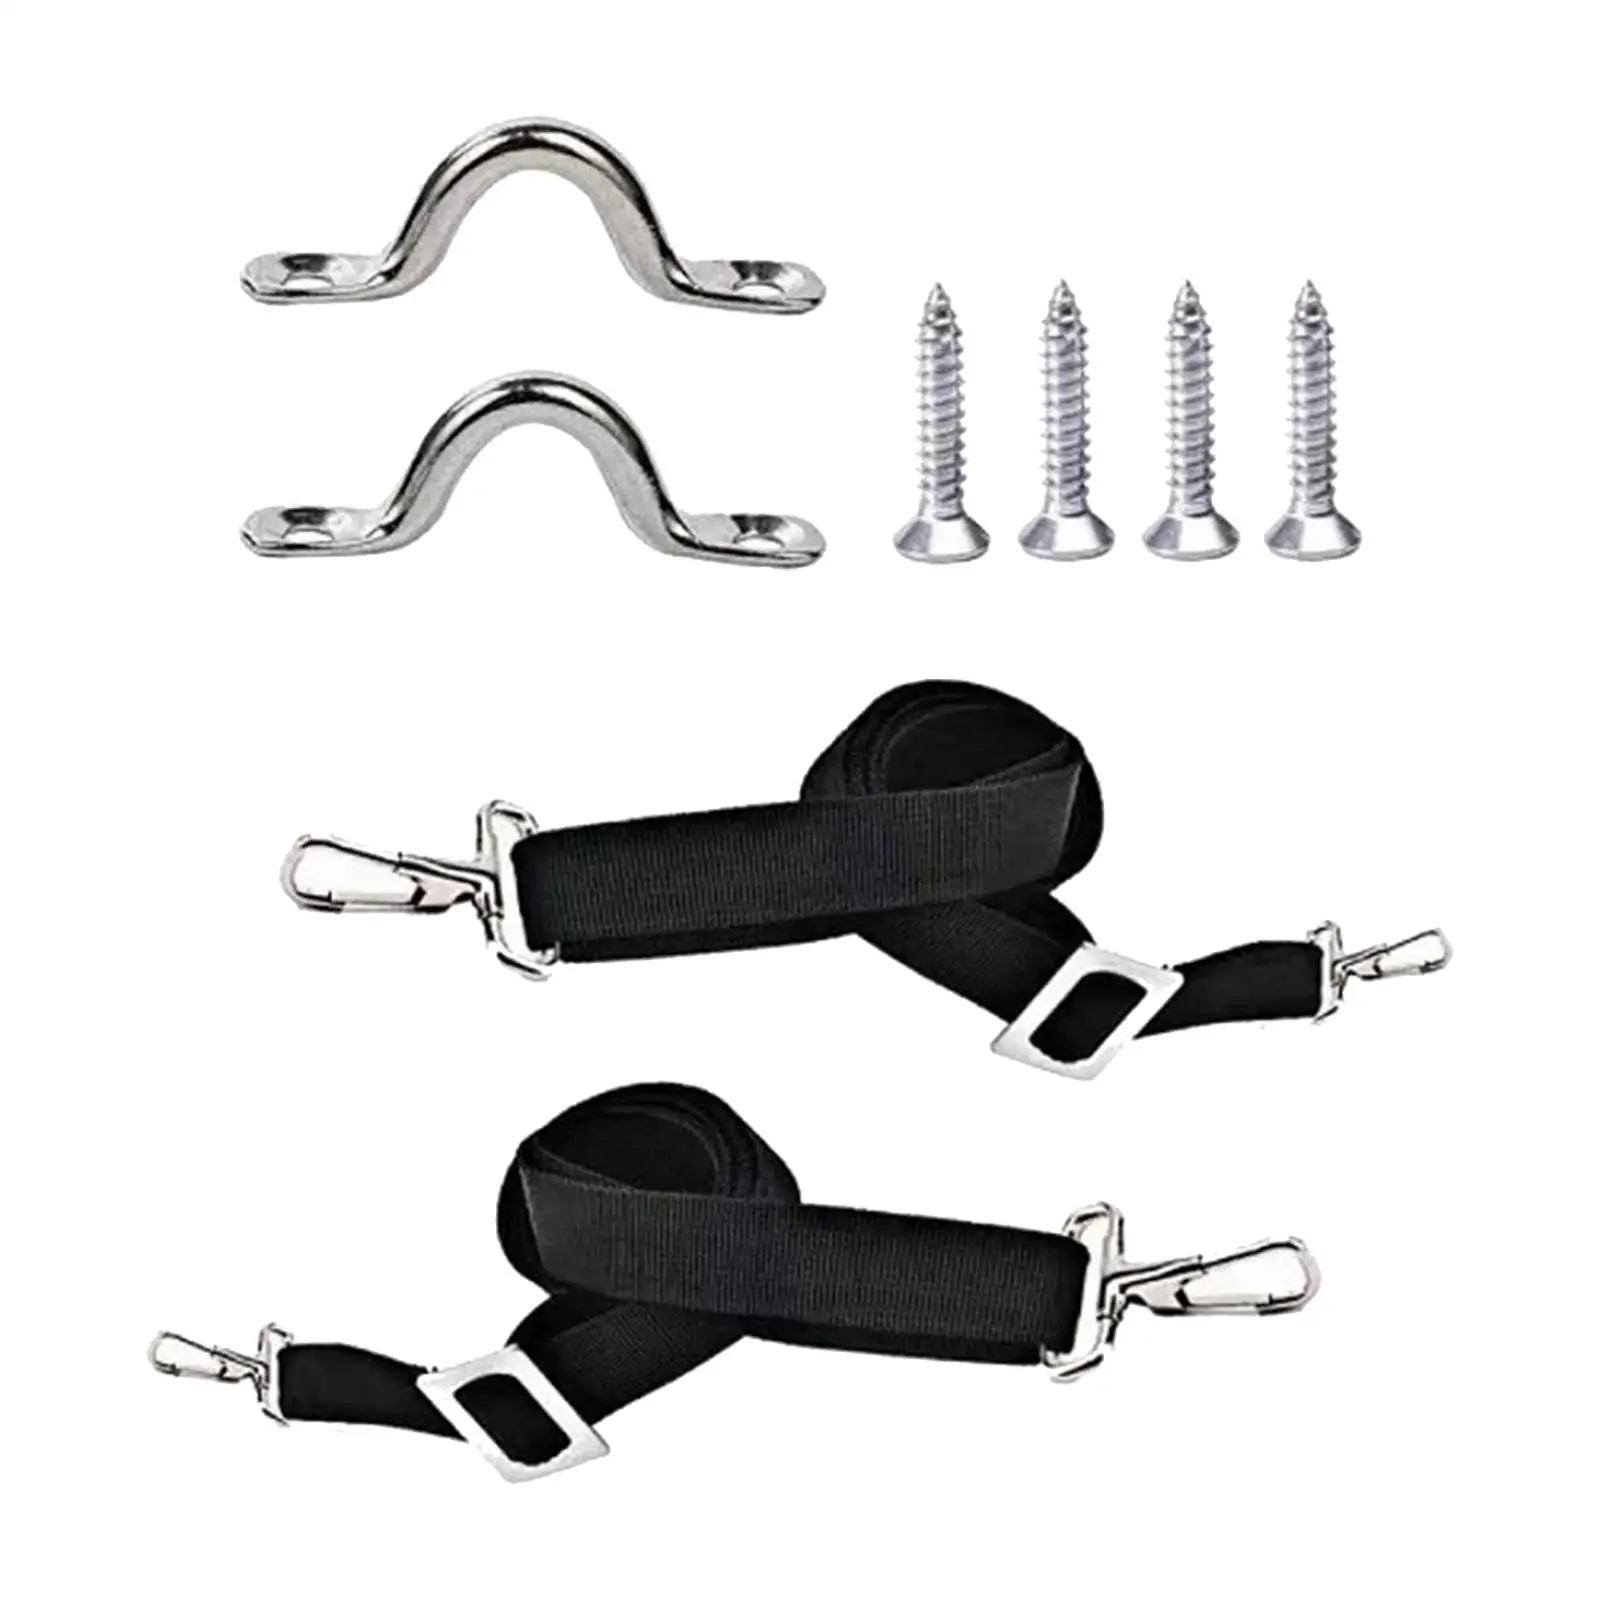 2x Adjustable Bimini Top Straps Pad Eye Straps W/ Loops and Hook 28